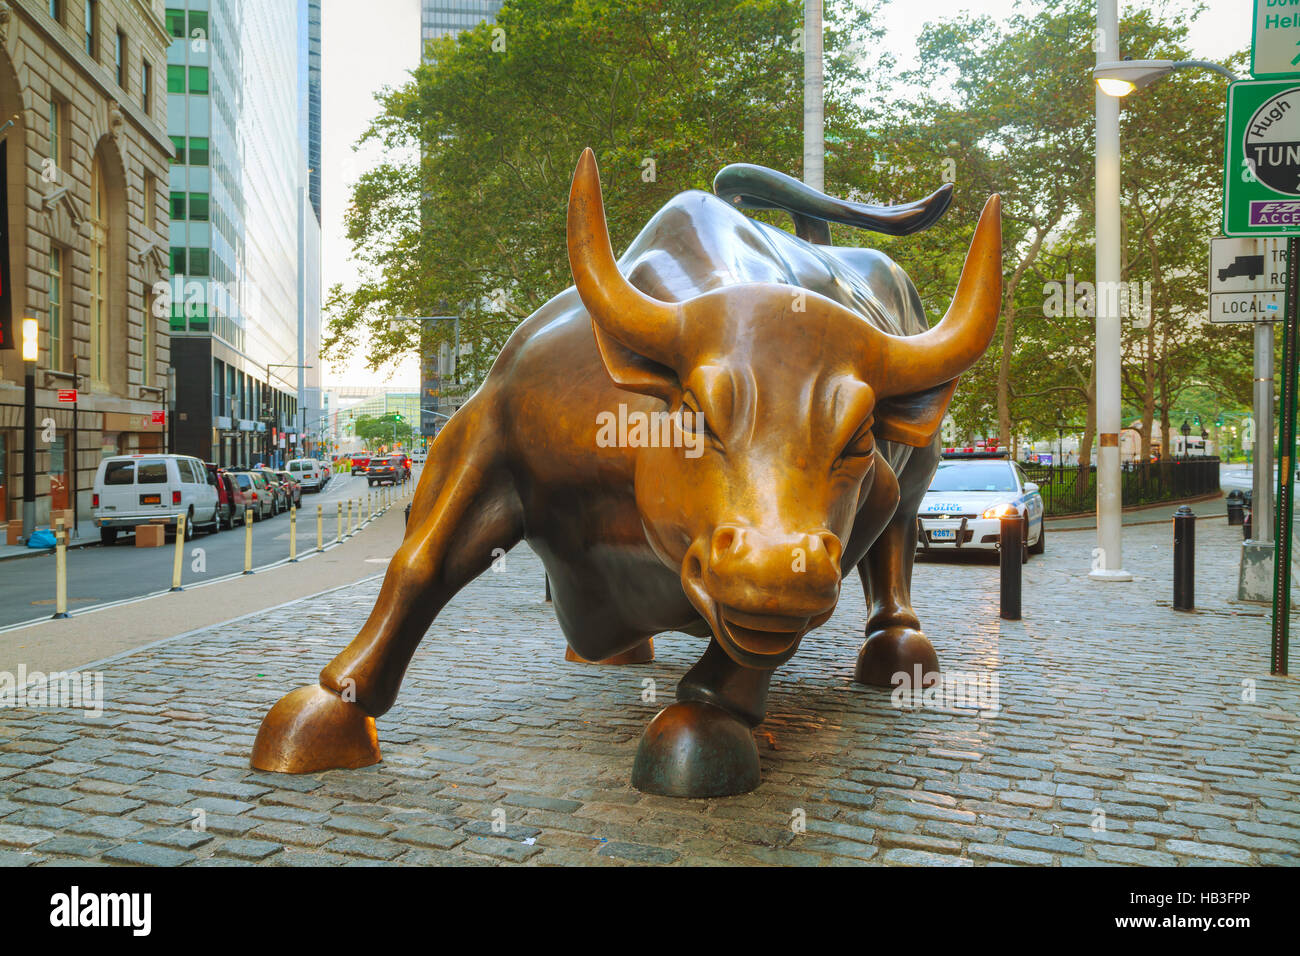 Charging Bull sculpture in New York City Stock Photo